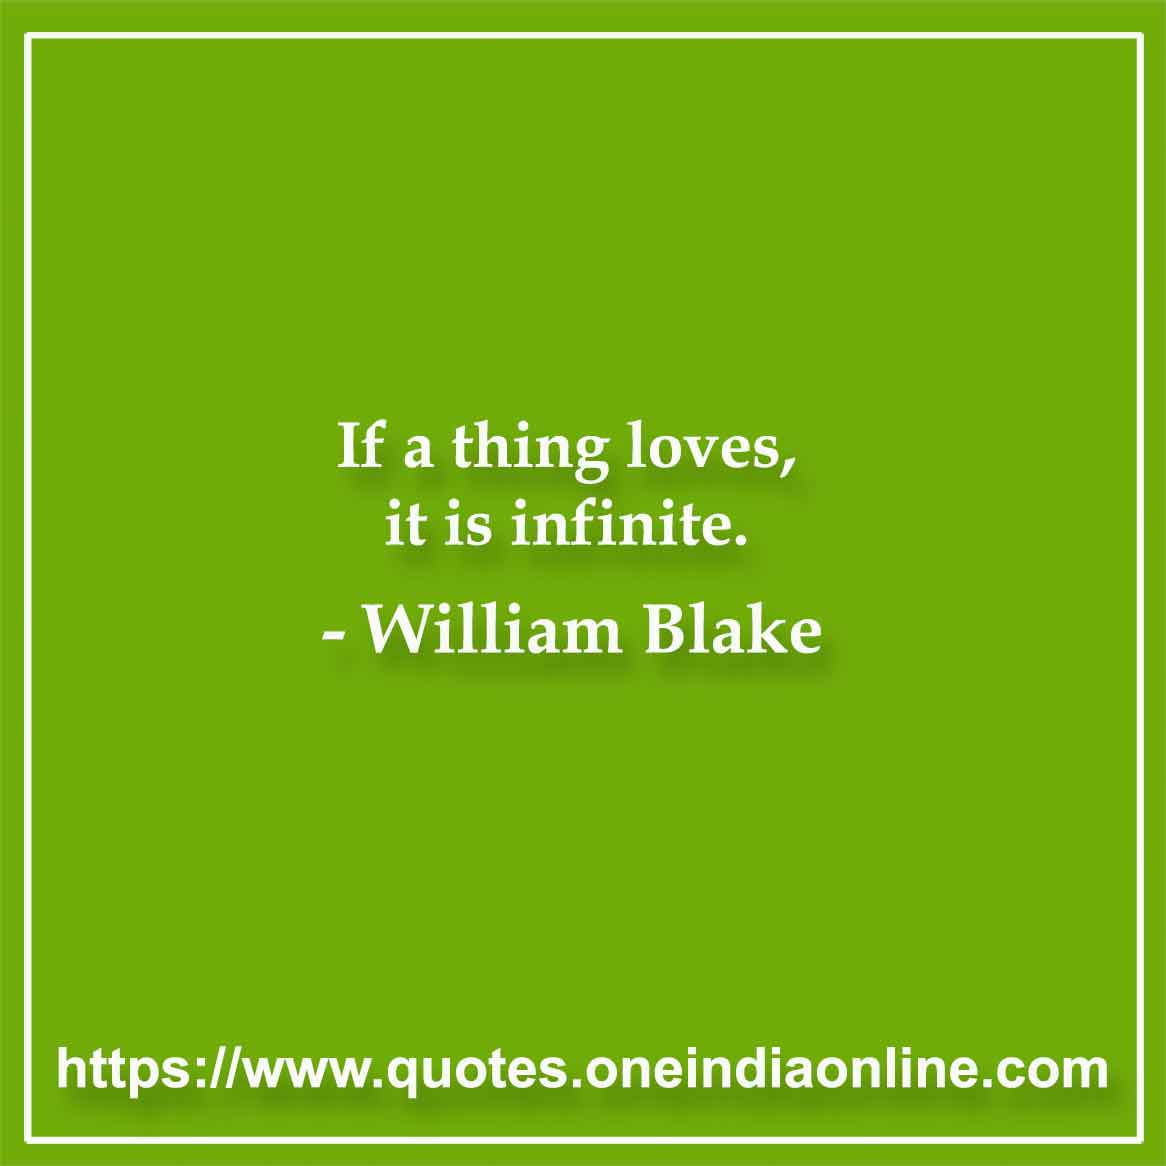 If a thing loves, it is infinite.

-  by William Blake